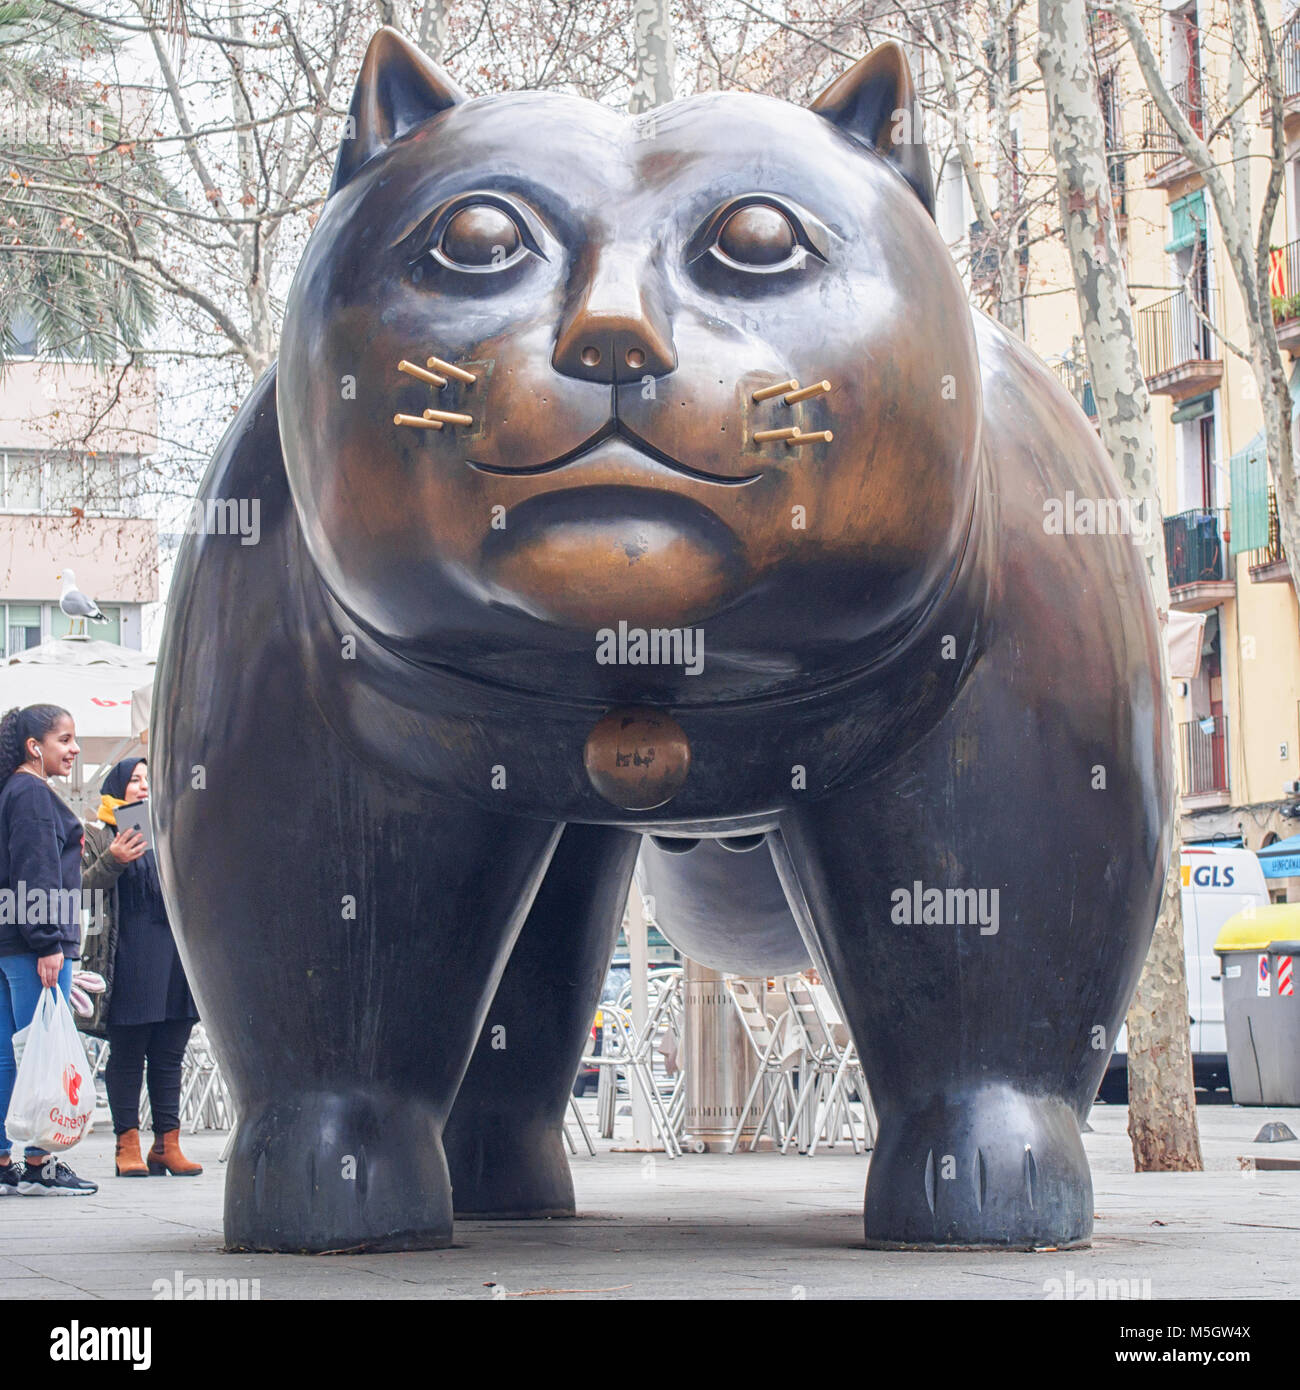 BARCELONA, SPAIN-FEBRUARY 17, 2018: Sculpture by Fernando Botero 'El Gato' ('The Cat') in the Raval district Stock Photo